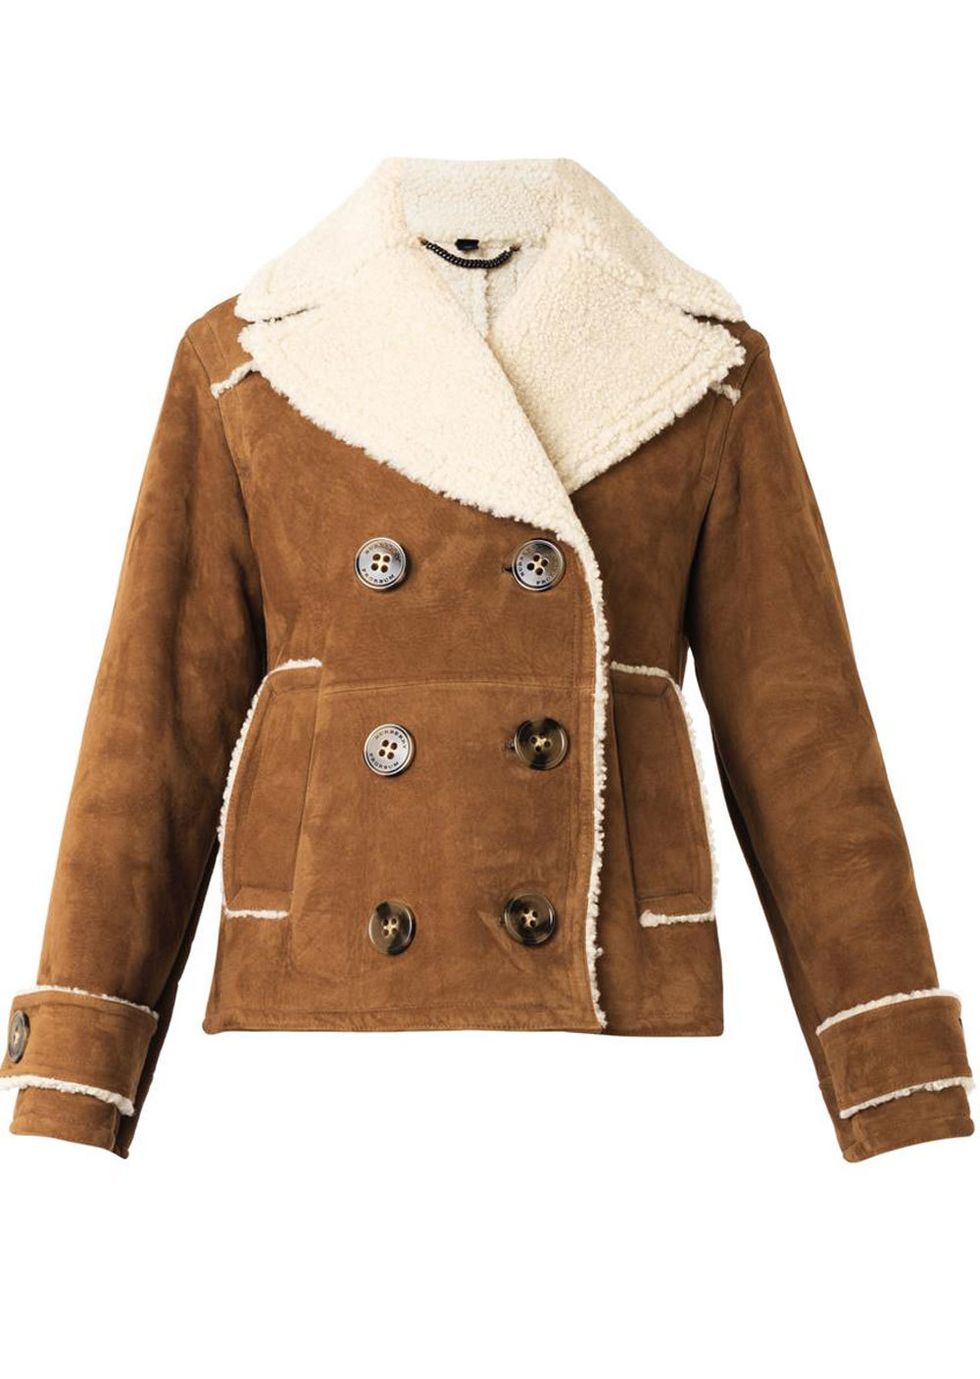 The Ultimate Shearling Jacket